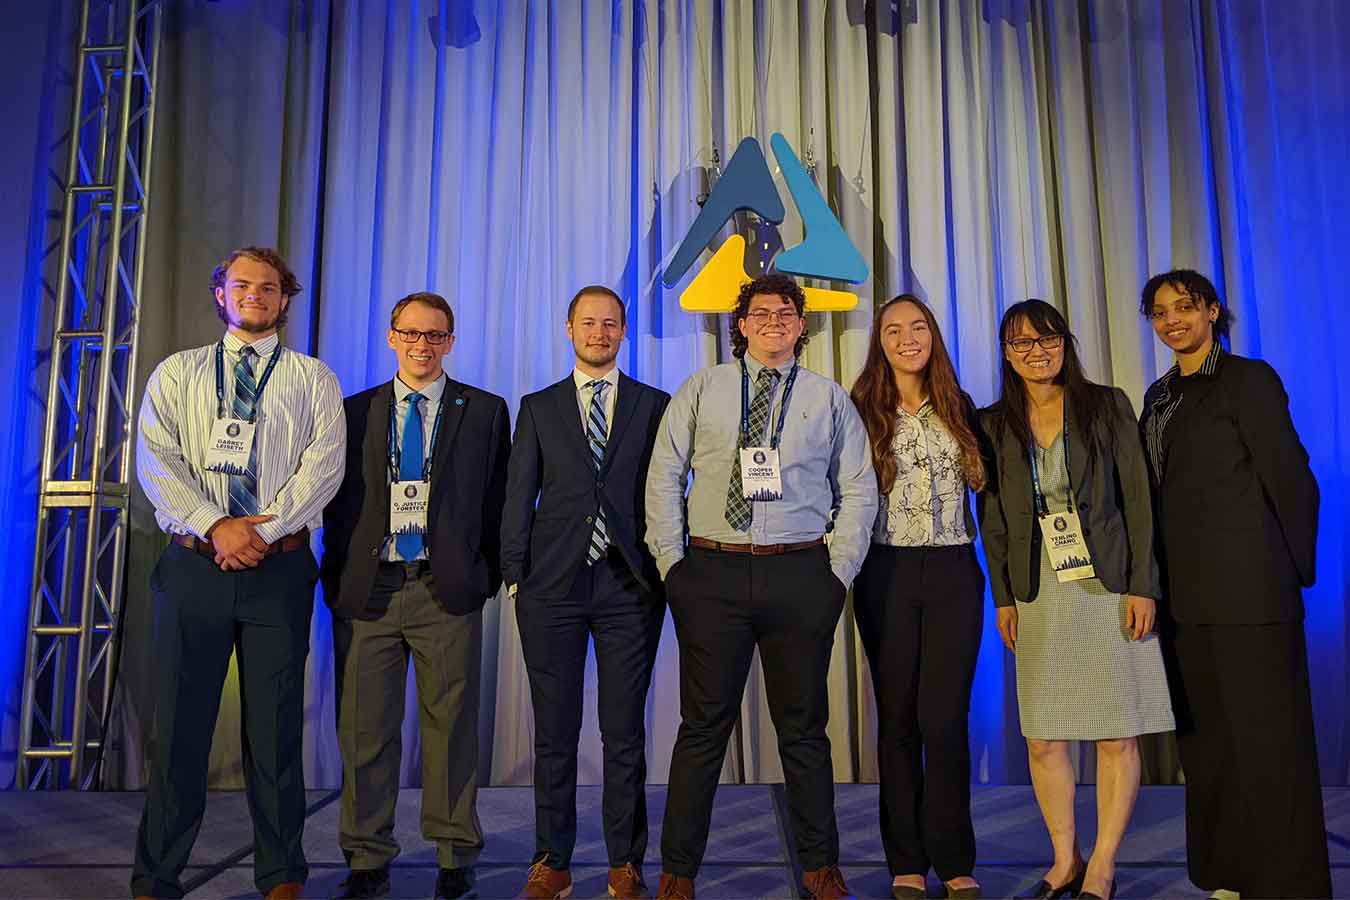 FBLA competitors at National FBLA Competition. Pictured (l-to-r): Garrett Leiseth, Justice Forster, Jacob Stricherz, Cooper Vincent, Kalani Mangin, Advisor Dr. Yenling Chang, and Ephrata Yared Feyissa.